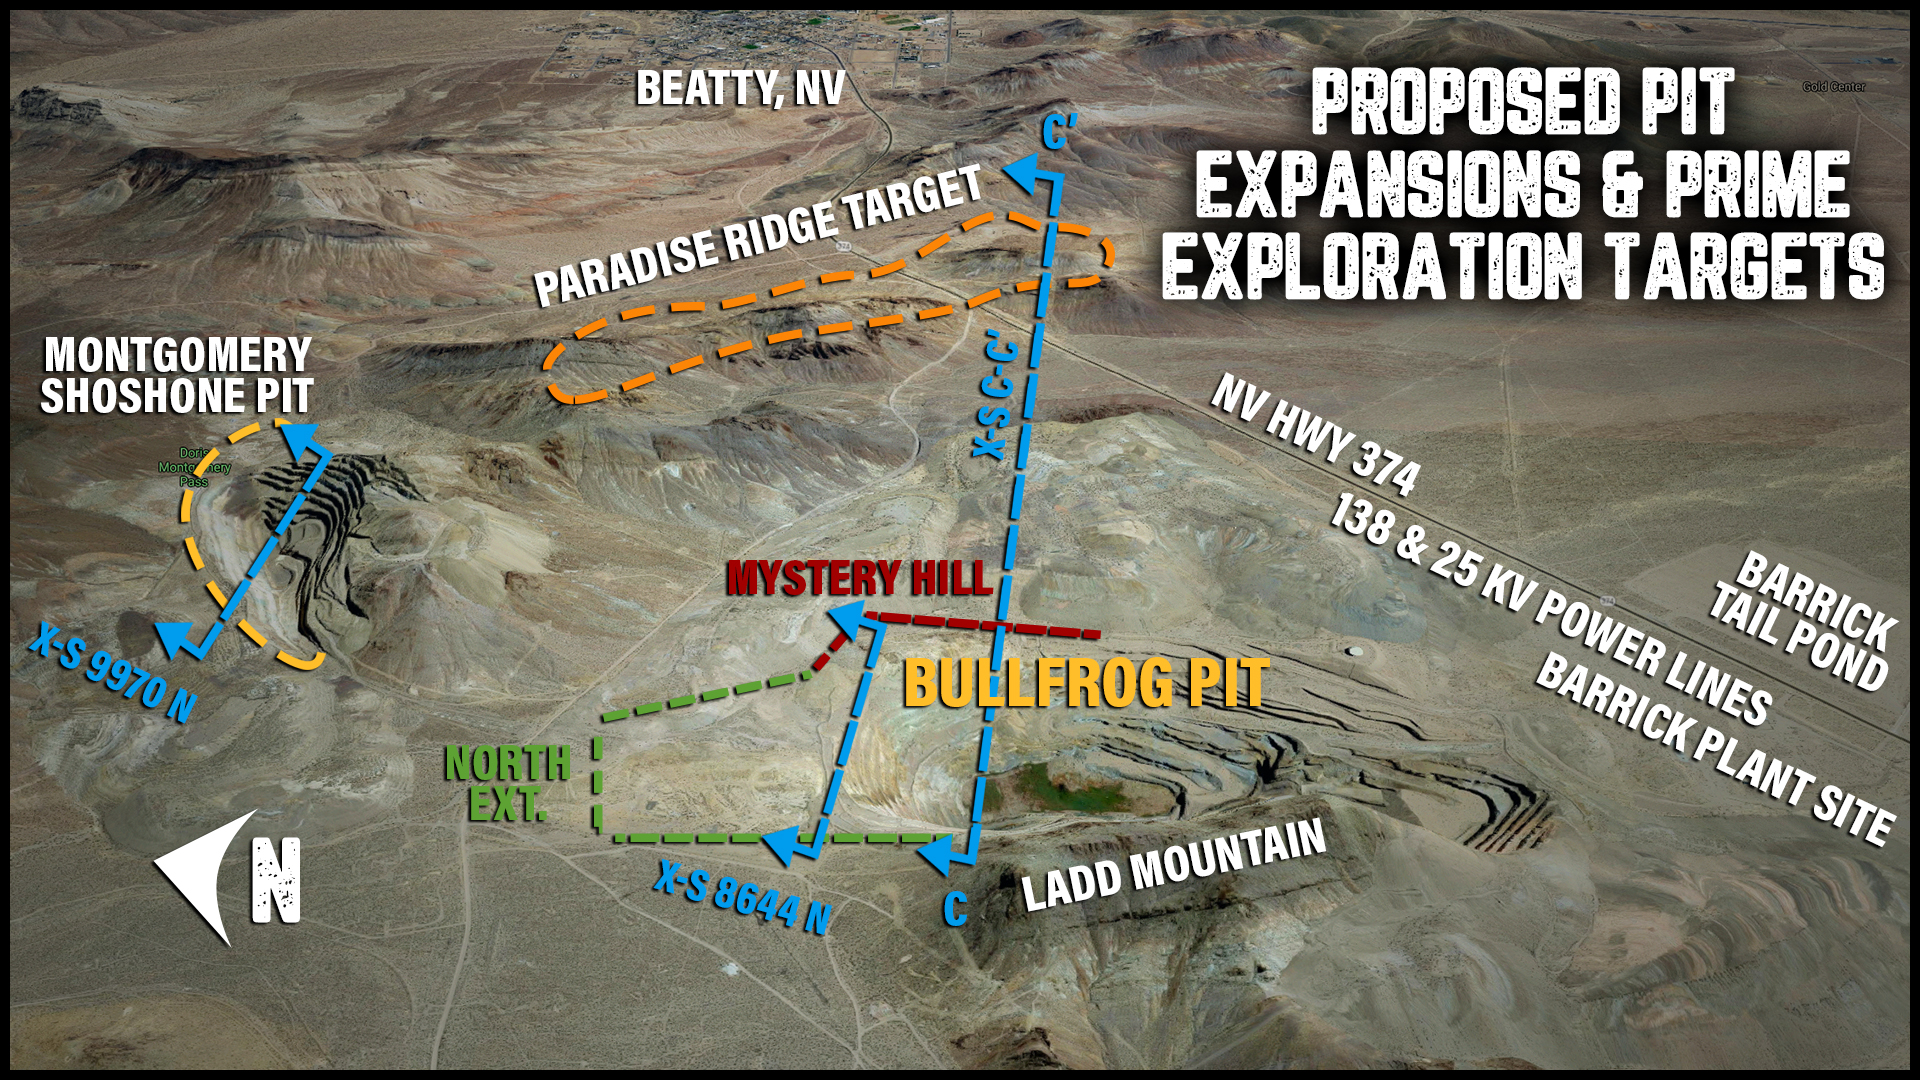 Proposes Pit Expansions and Prime Exploration Target